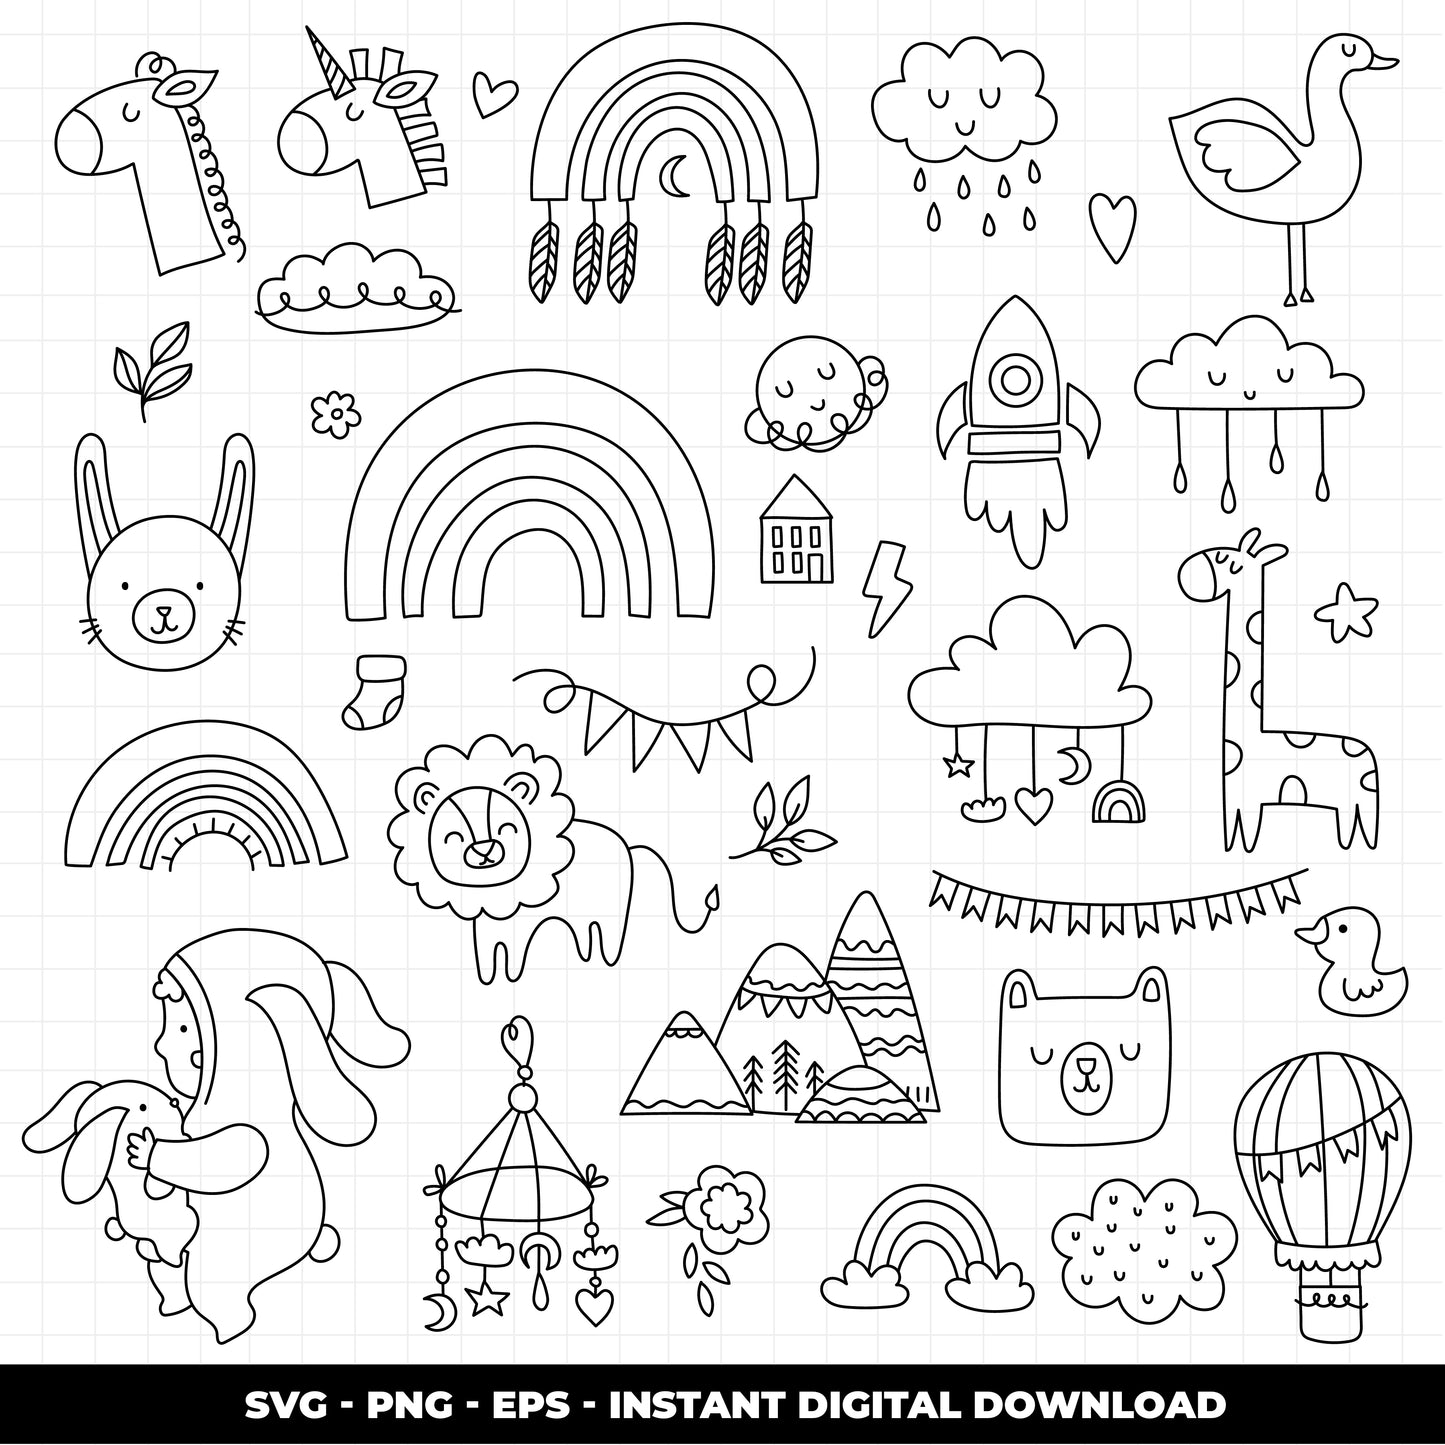 COD938 Baby svg, baby doodle svg, baby png, baby clipart, unicorn baby svg